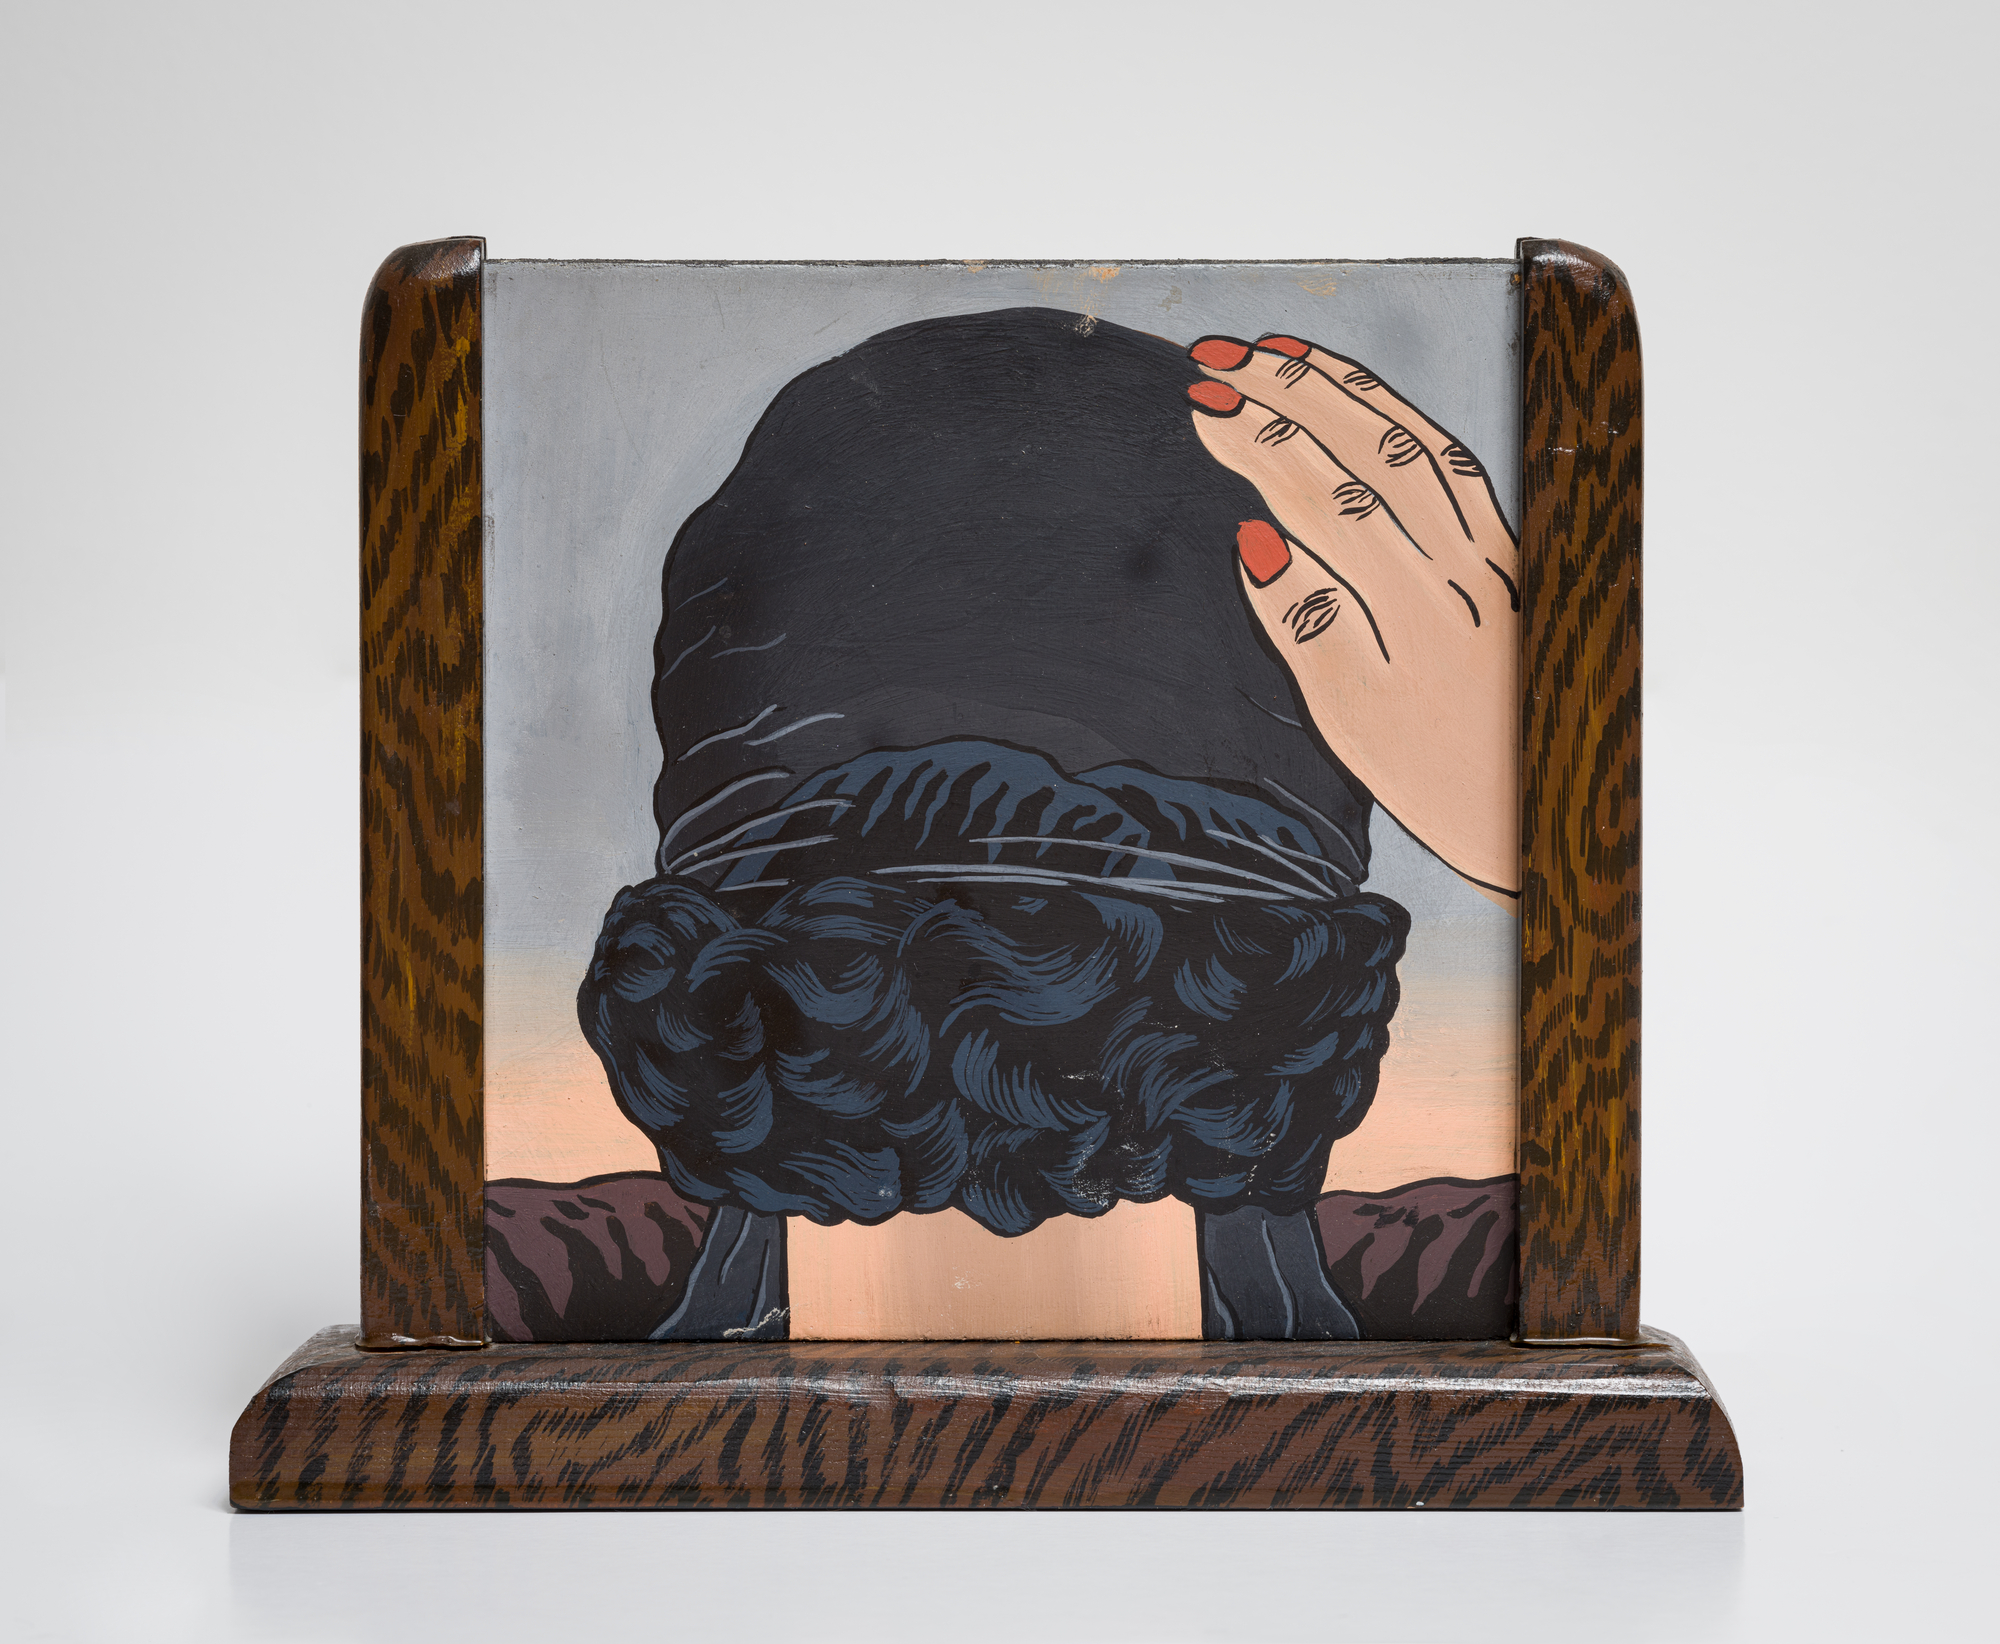 Square painting in a standing wood frame depicting the back of a head with dark hair and a hand with red fingernails.